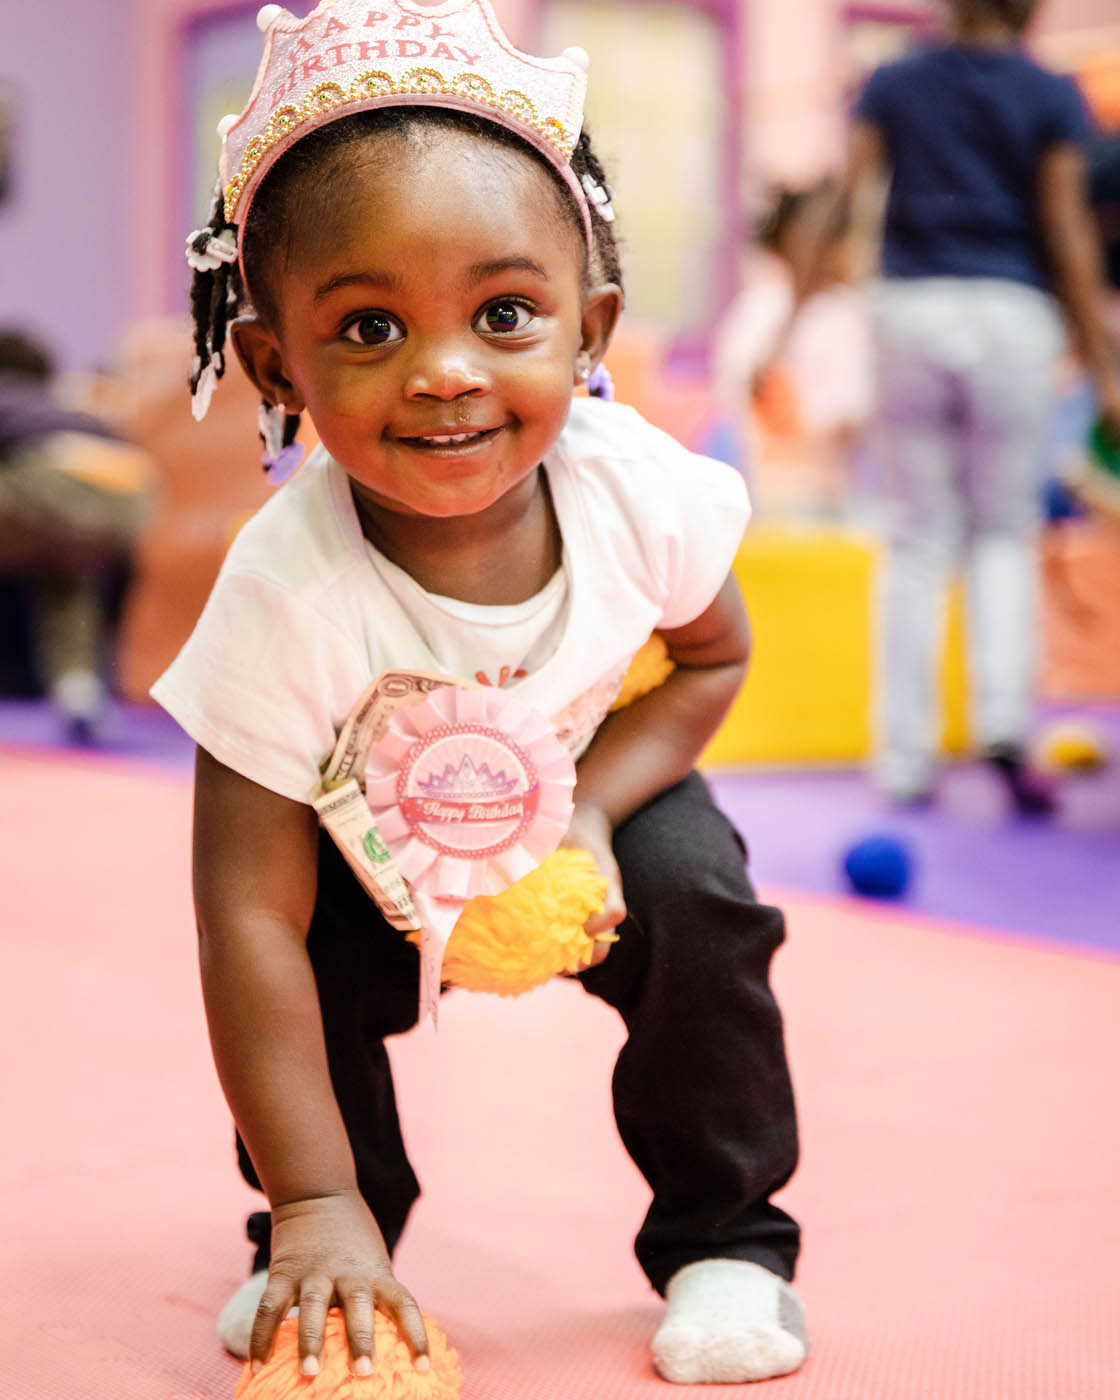 A toddler in a white shirt smiling at the camera, contact us today for toddler activities in Midlothian.